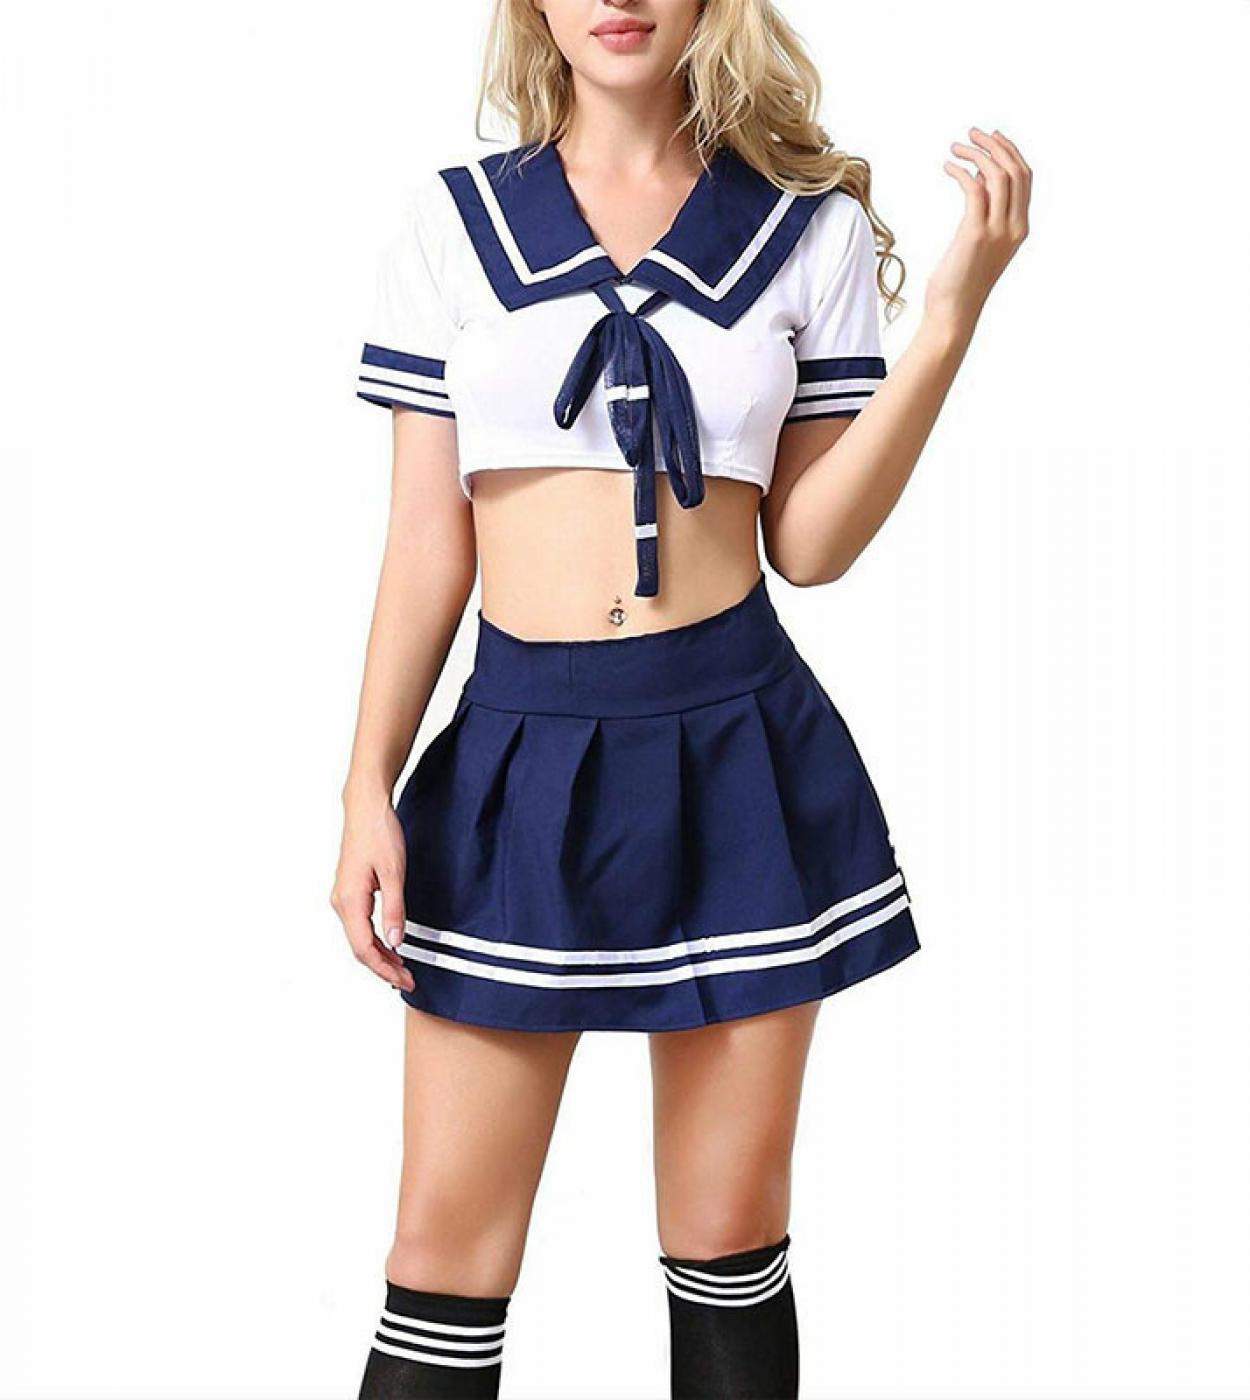 Cosplay Student Uniform Temptation Suit Hot  Clothing Sailor Underwear Porno School Girl Role Play  Outfits For Women